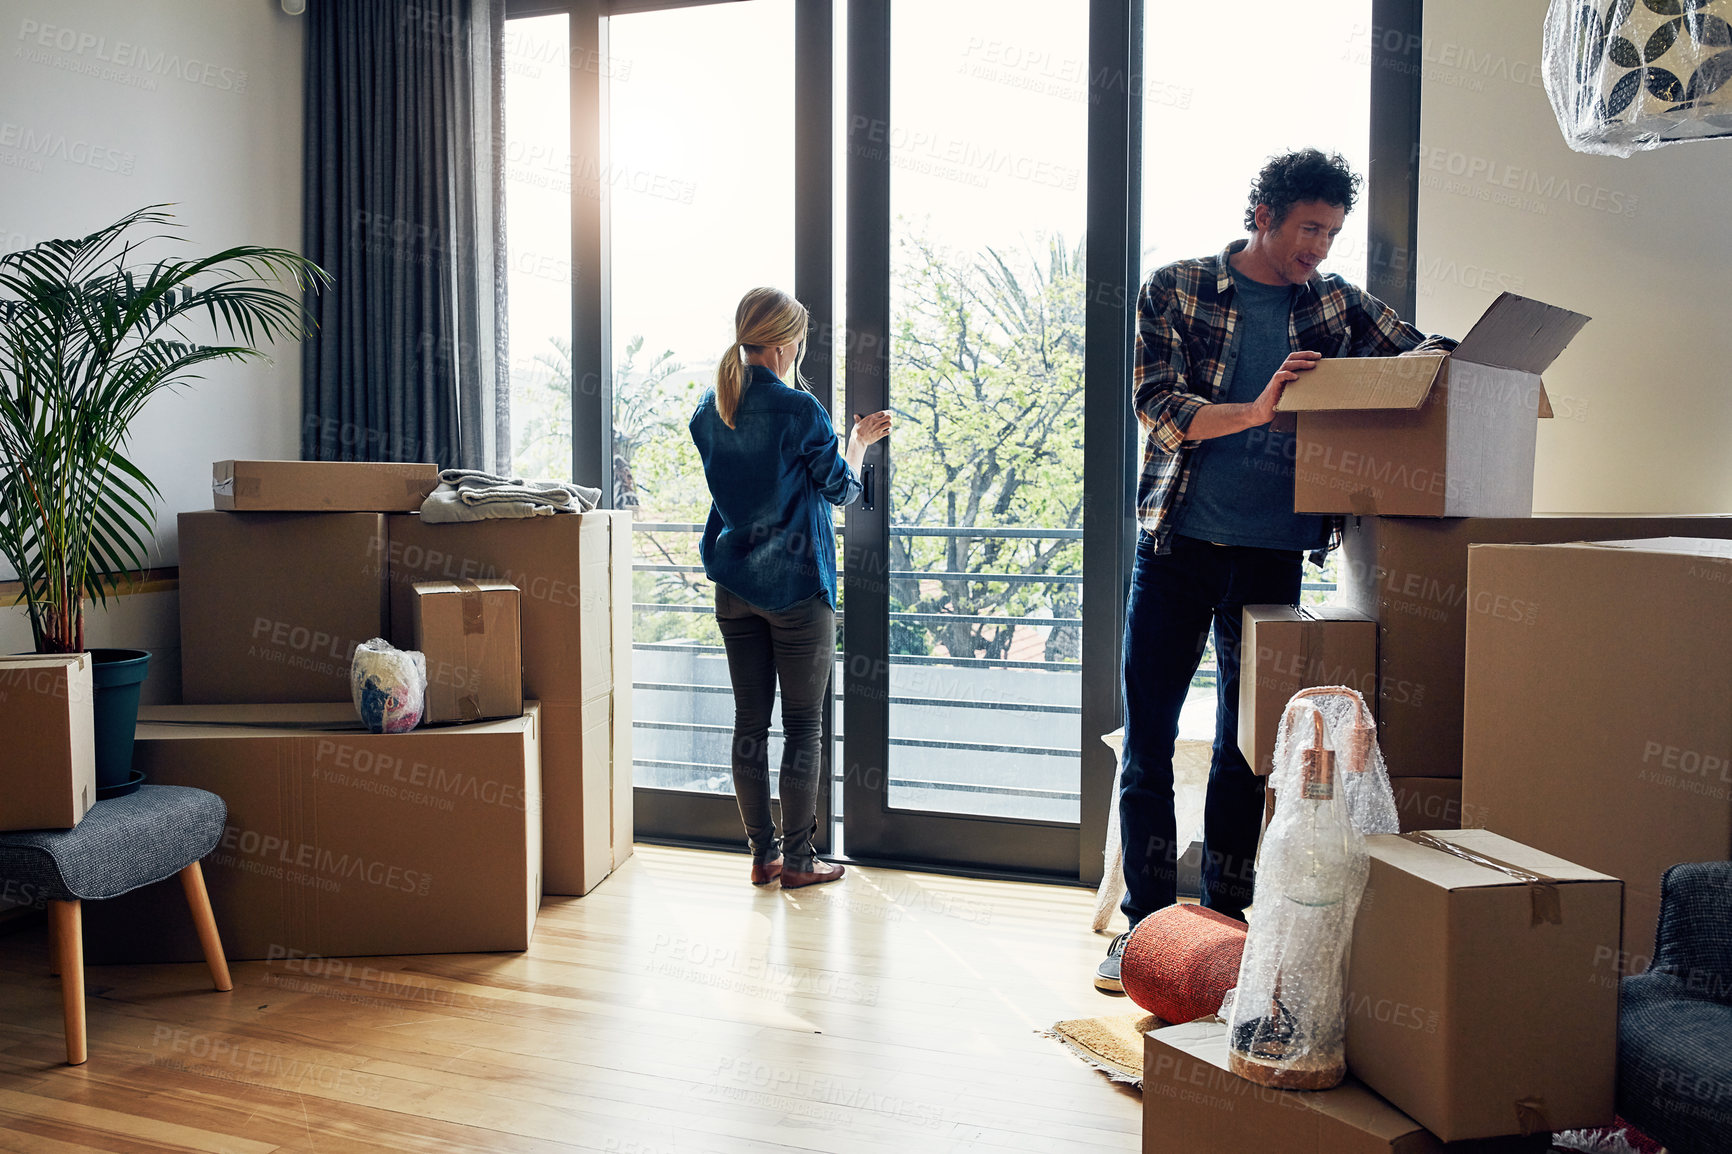 Buy stock photo Shot of a focused middle aged couple packing out a boxes at their new home inside during the day